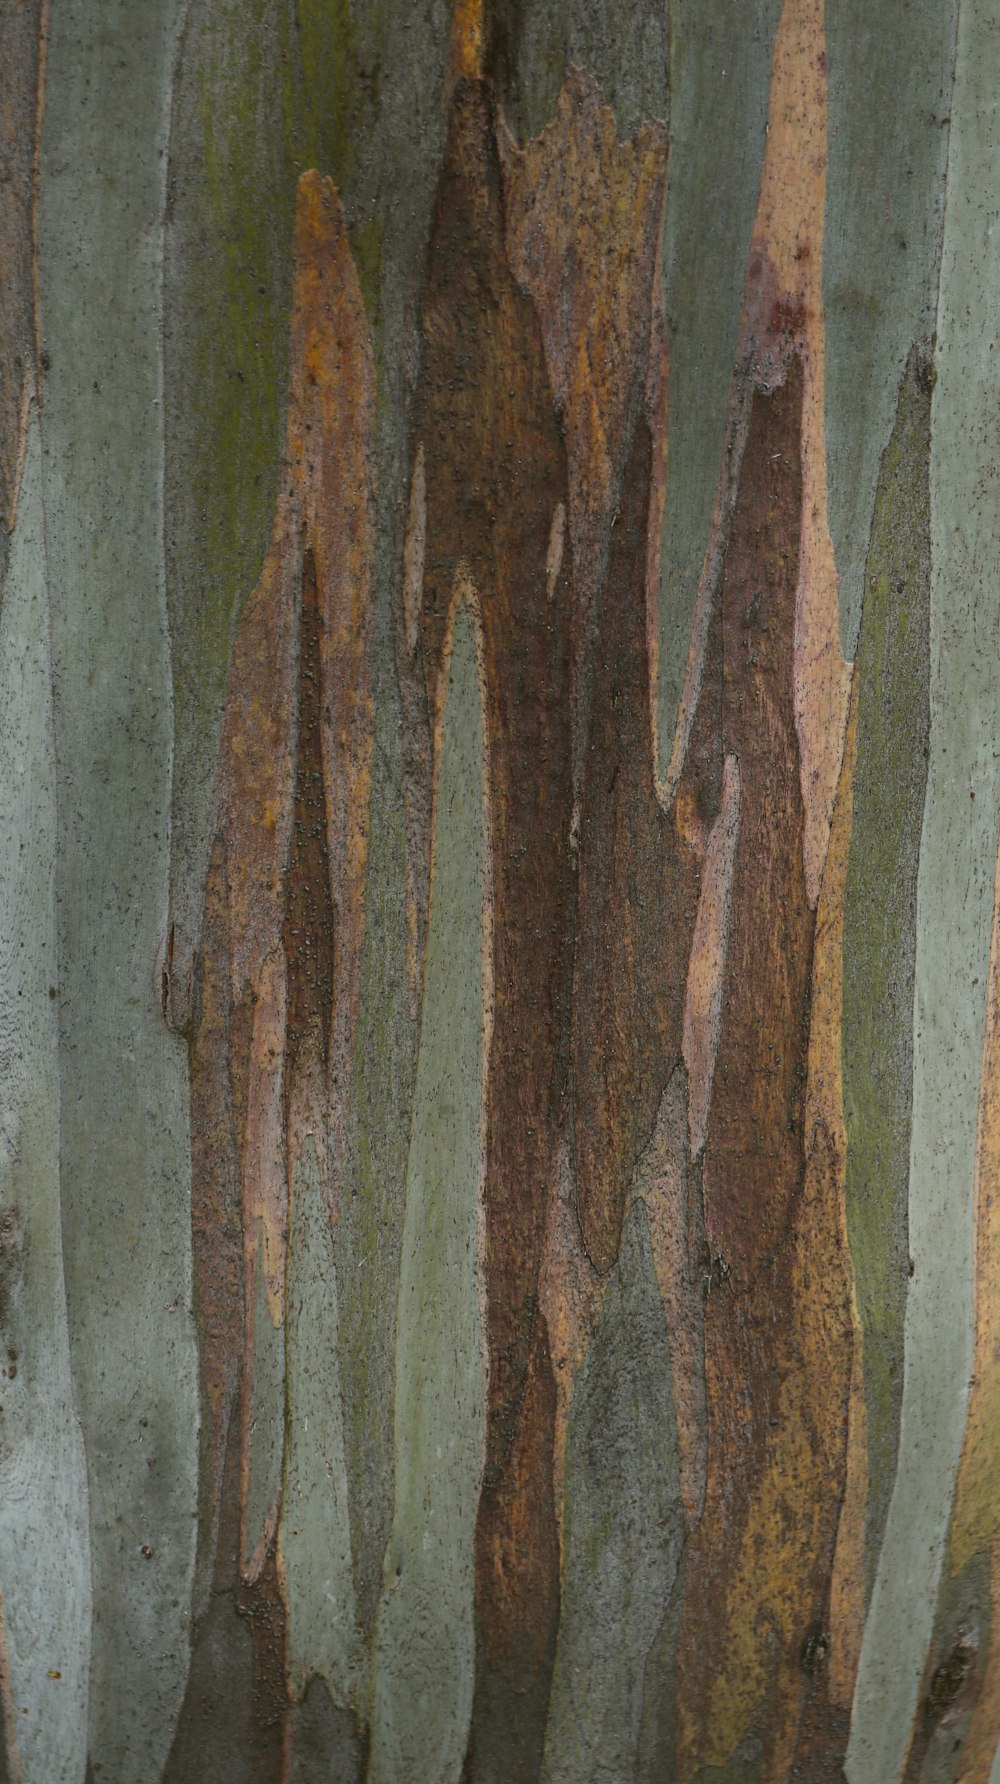 a close up of a tree trunk with brown and green leaves